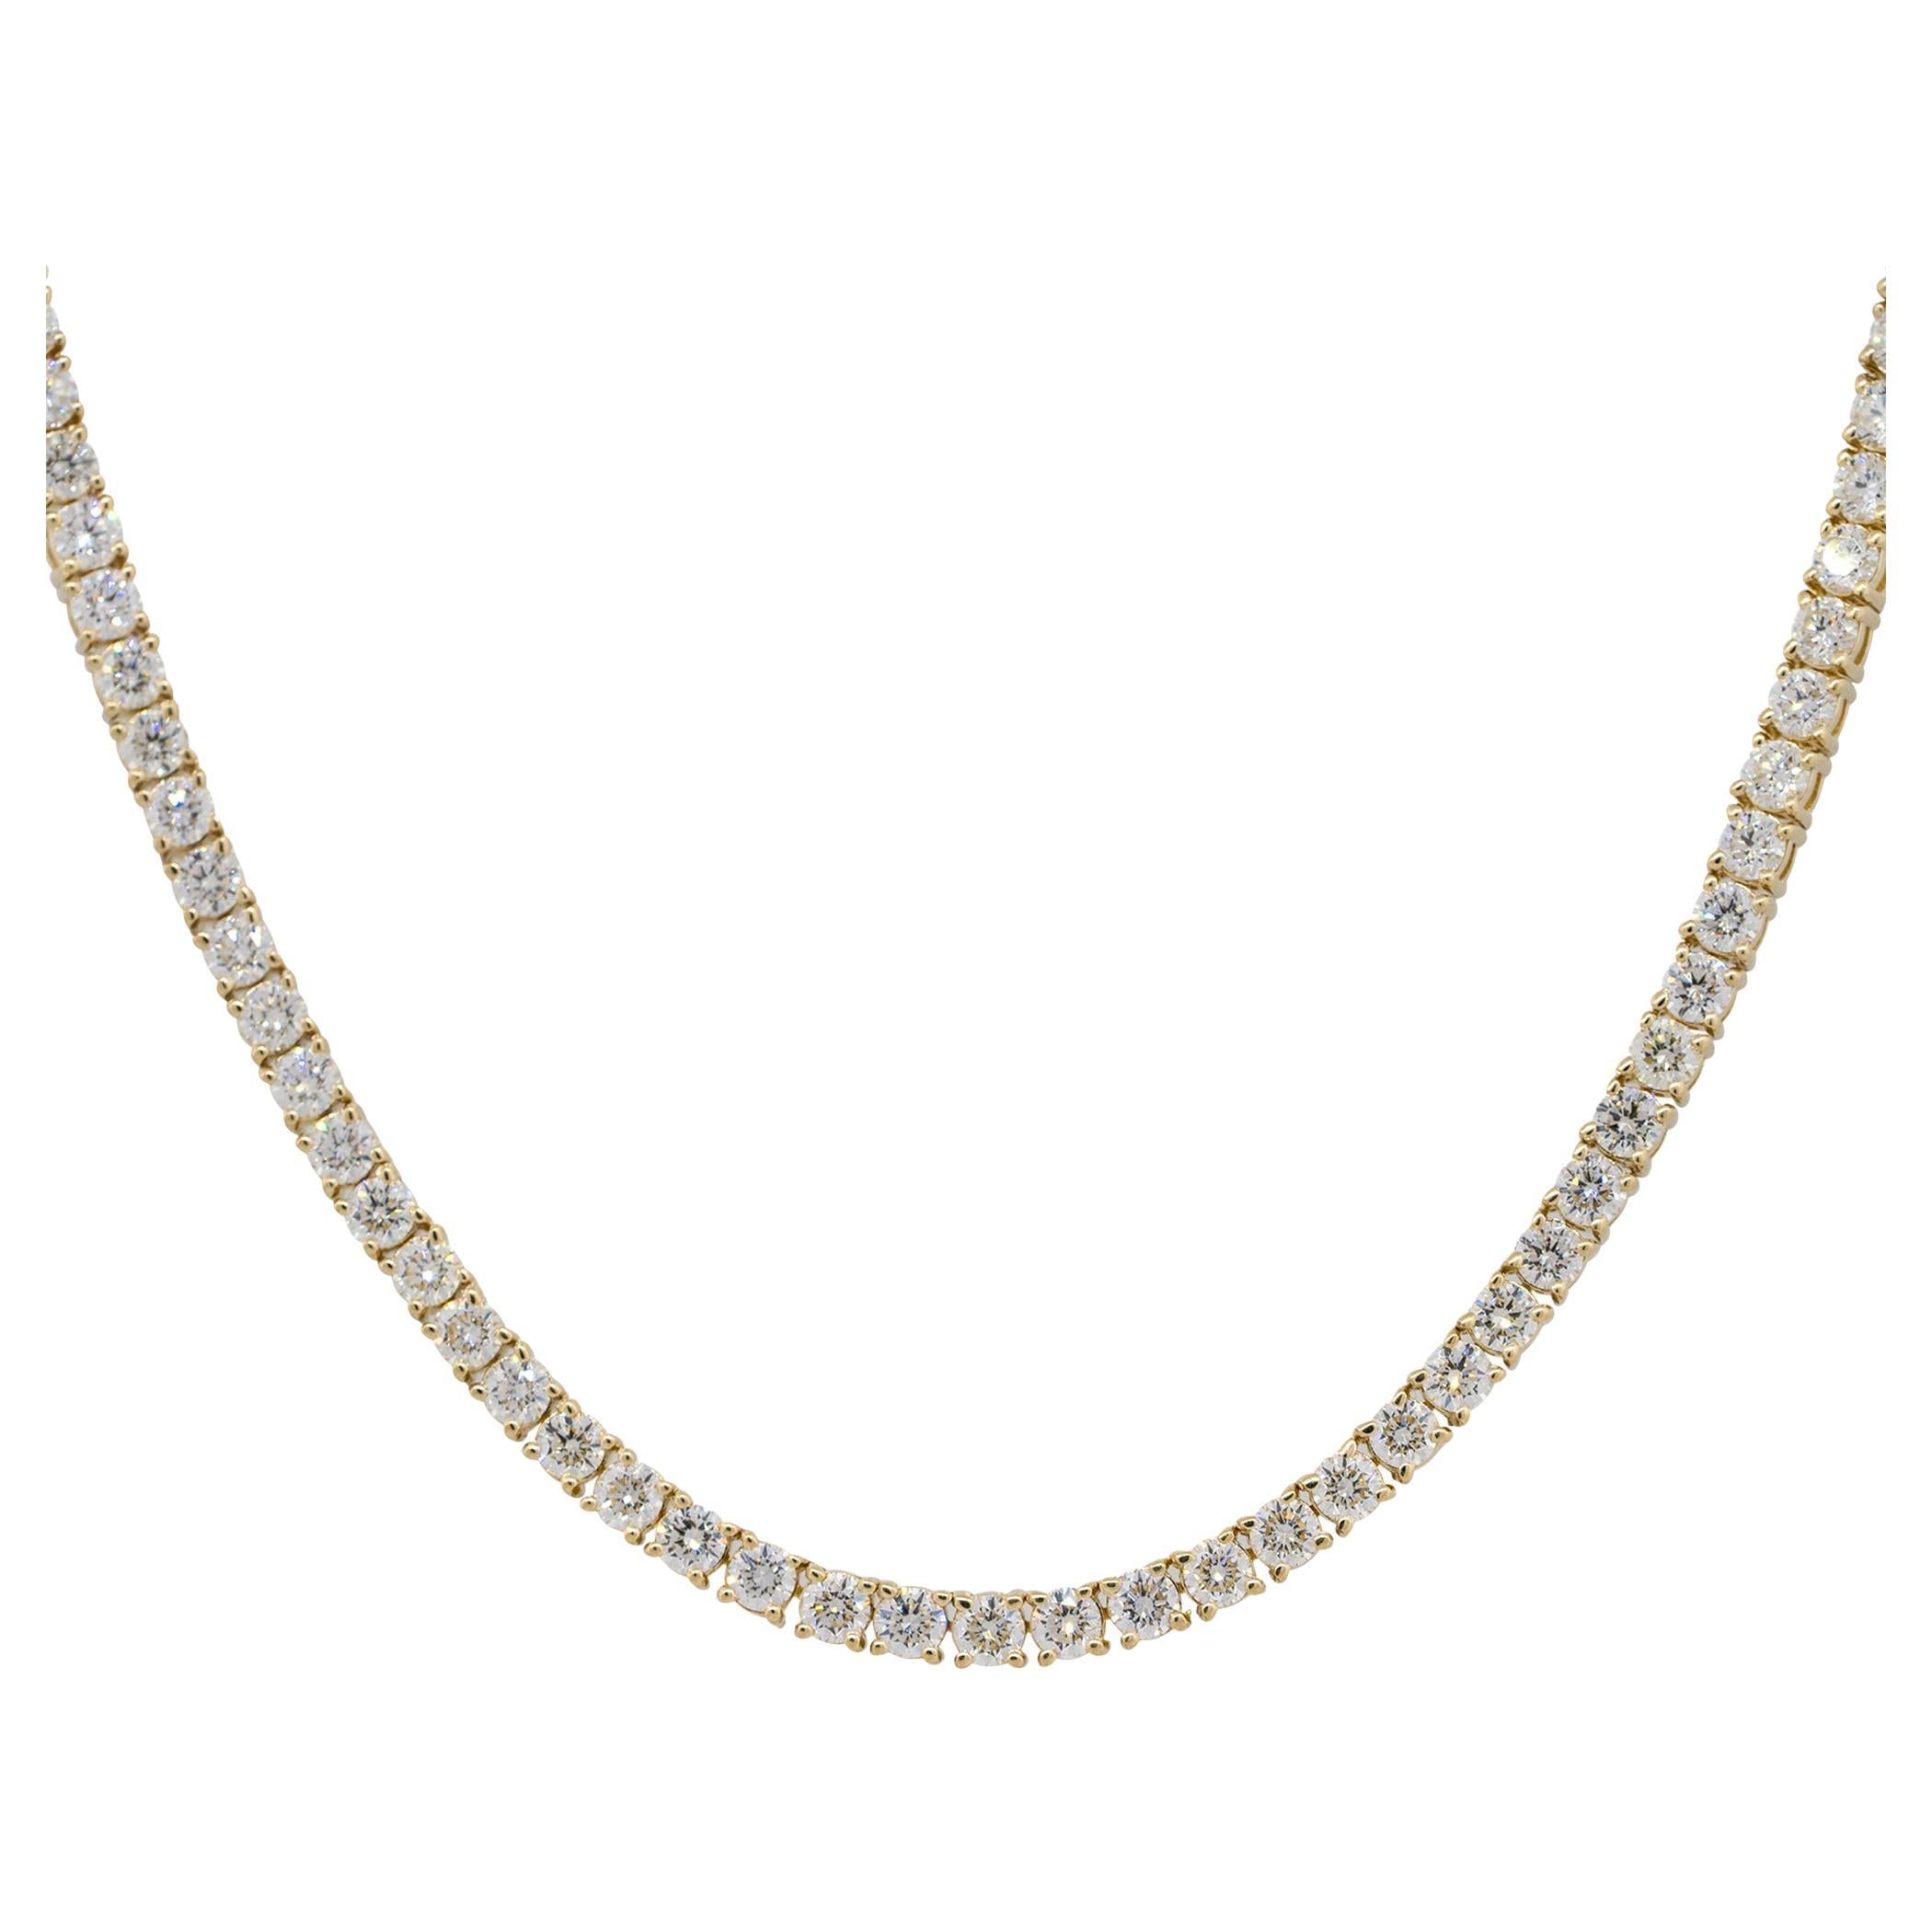 6.76 Carat Round Diamond Four Prong Tennis Necklace 14 Karat in Stock For Sale